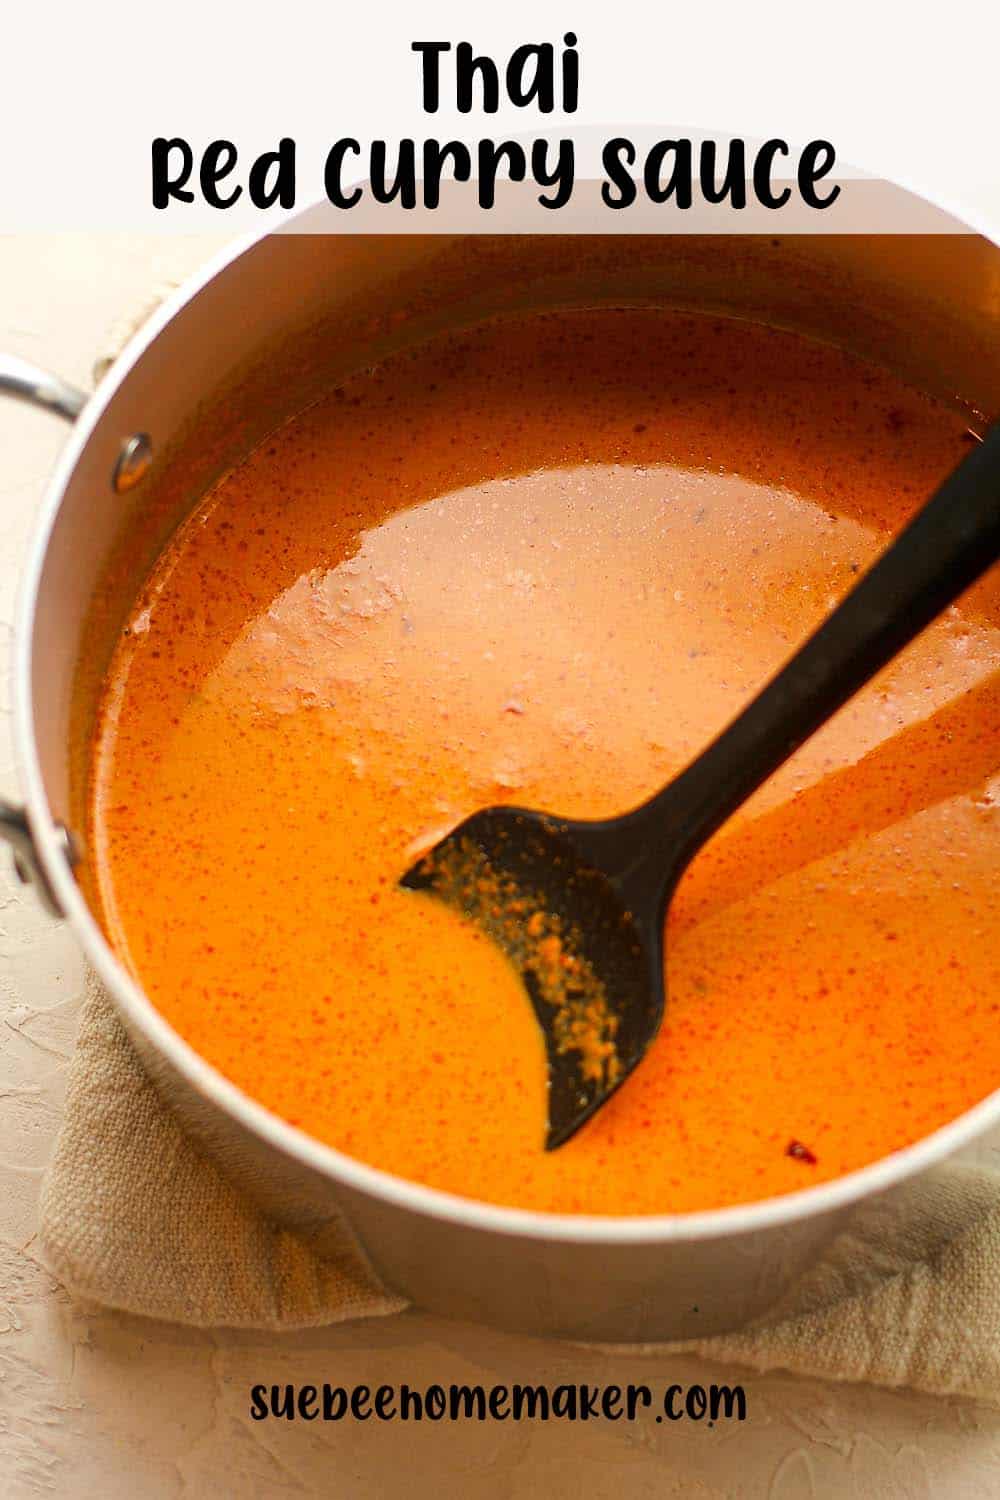 A pan of Thai red curry sauce.